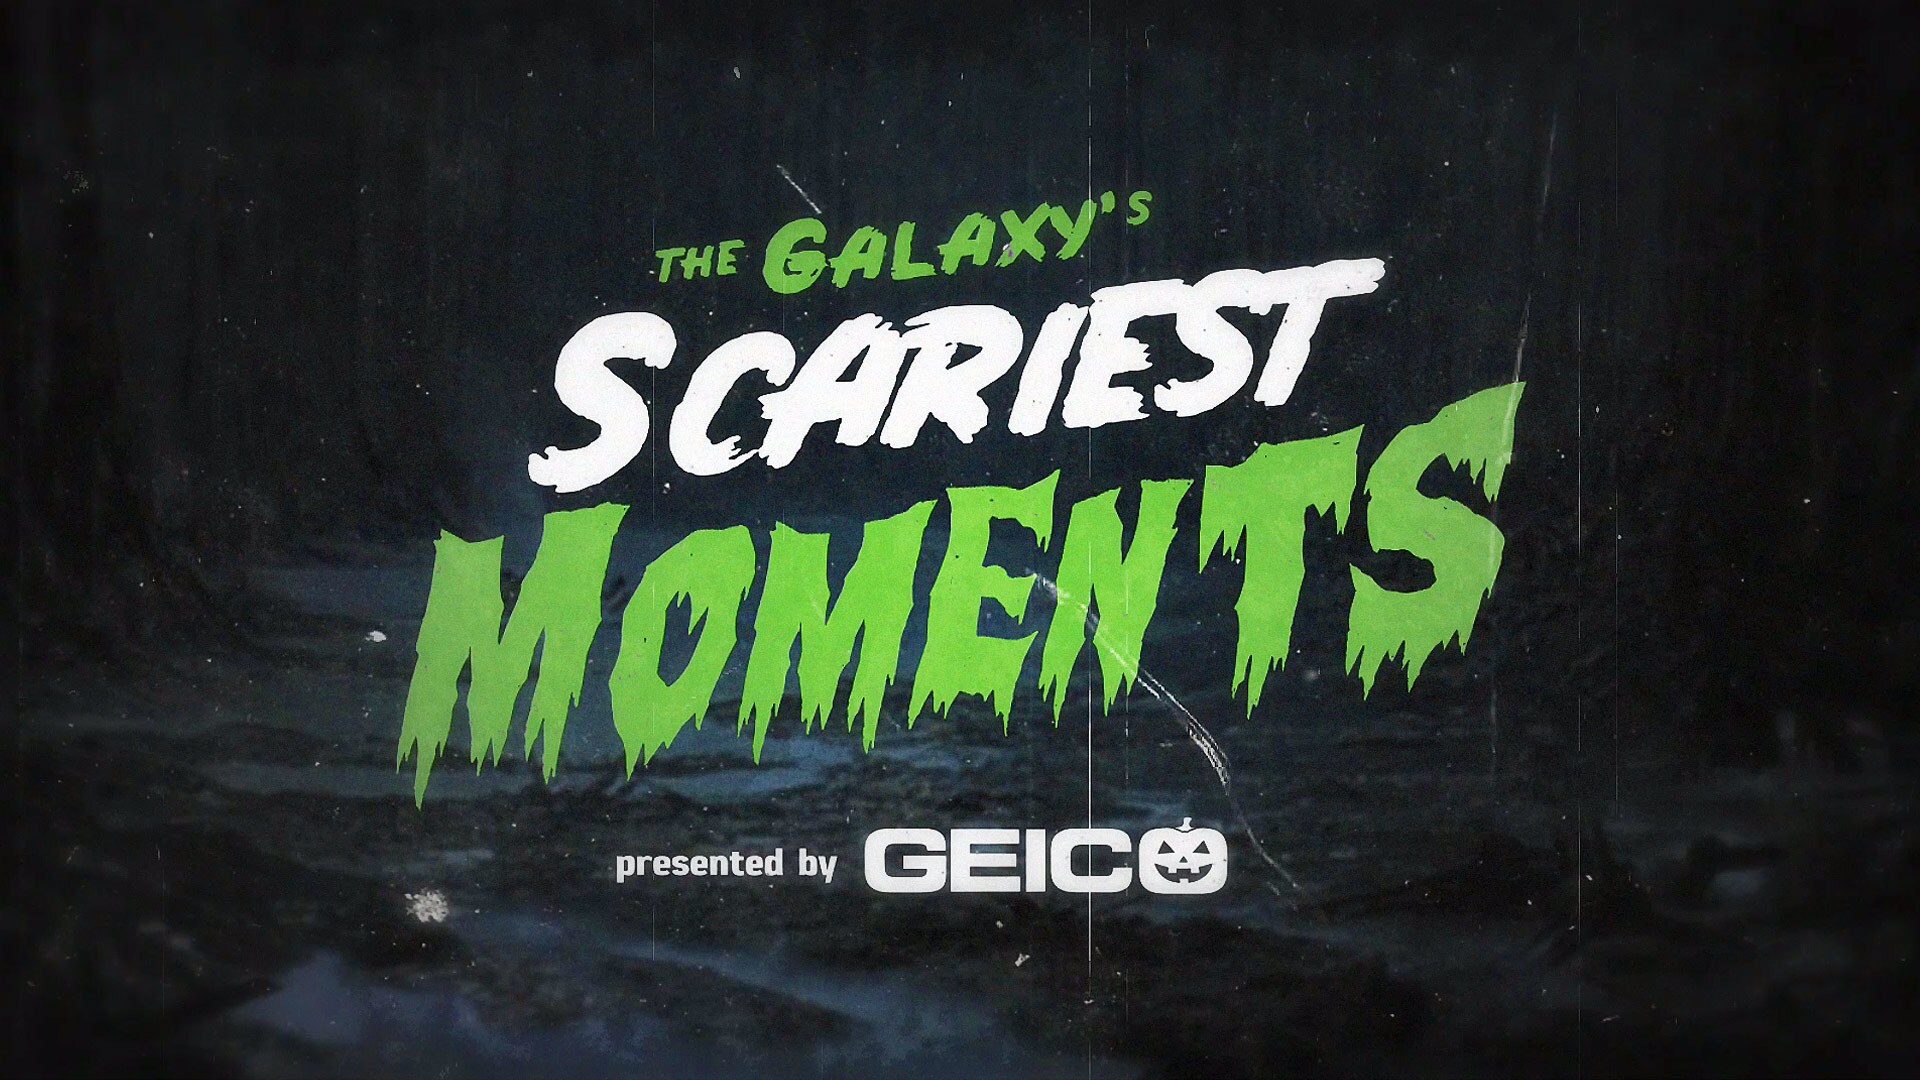 The Galaxy's Scariest Moments